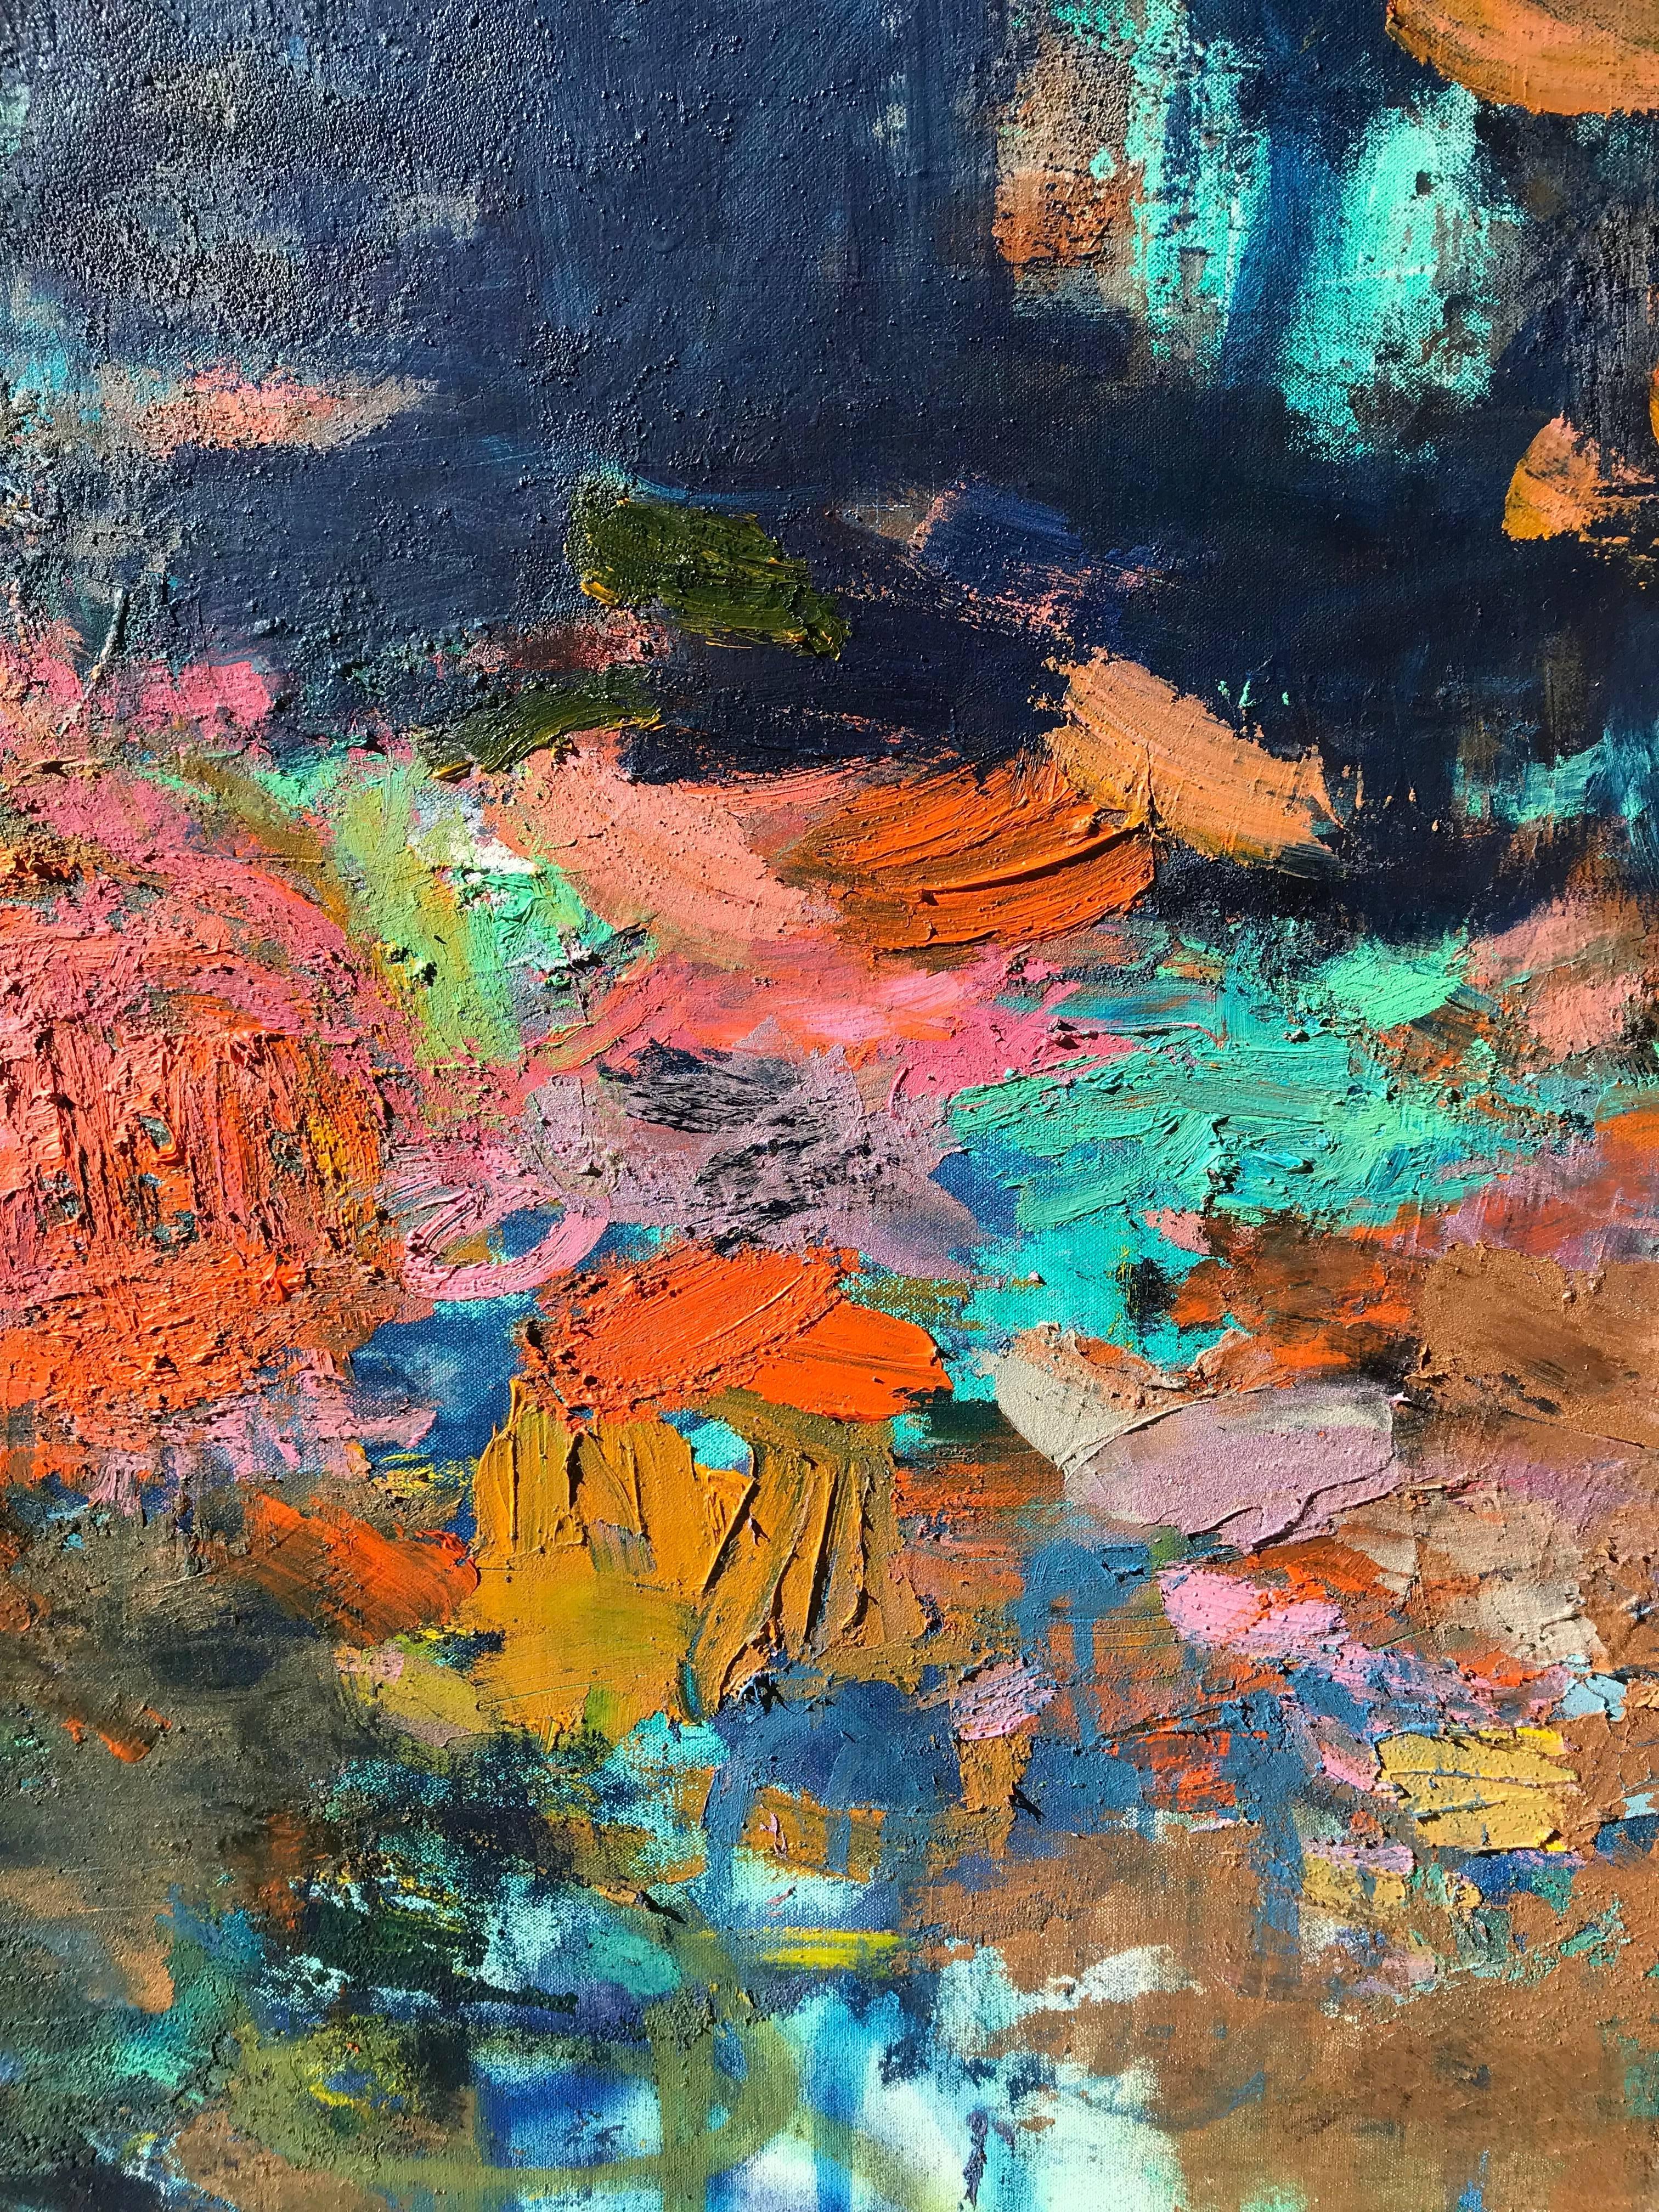 Unsettled Heart - Abstract Expressionist Painting by Amy Donaldson